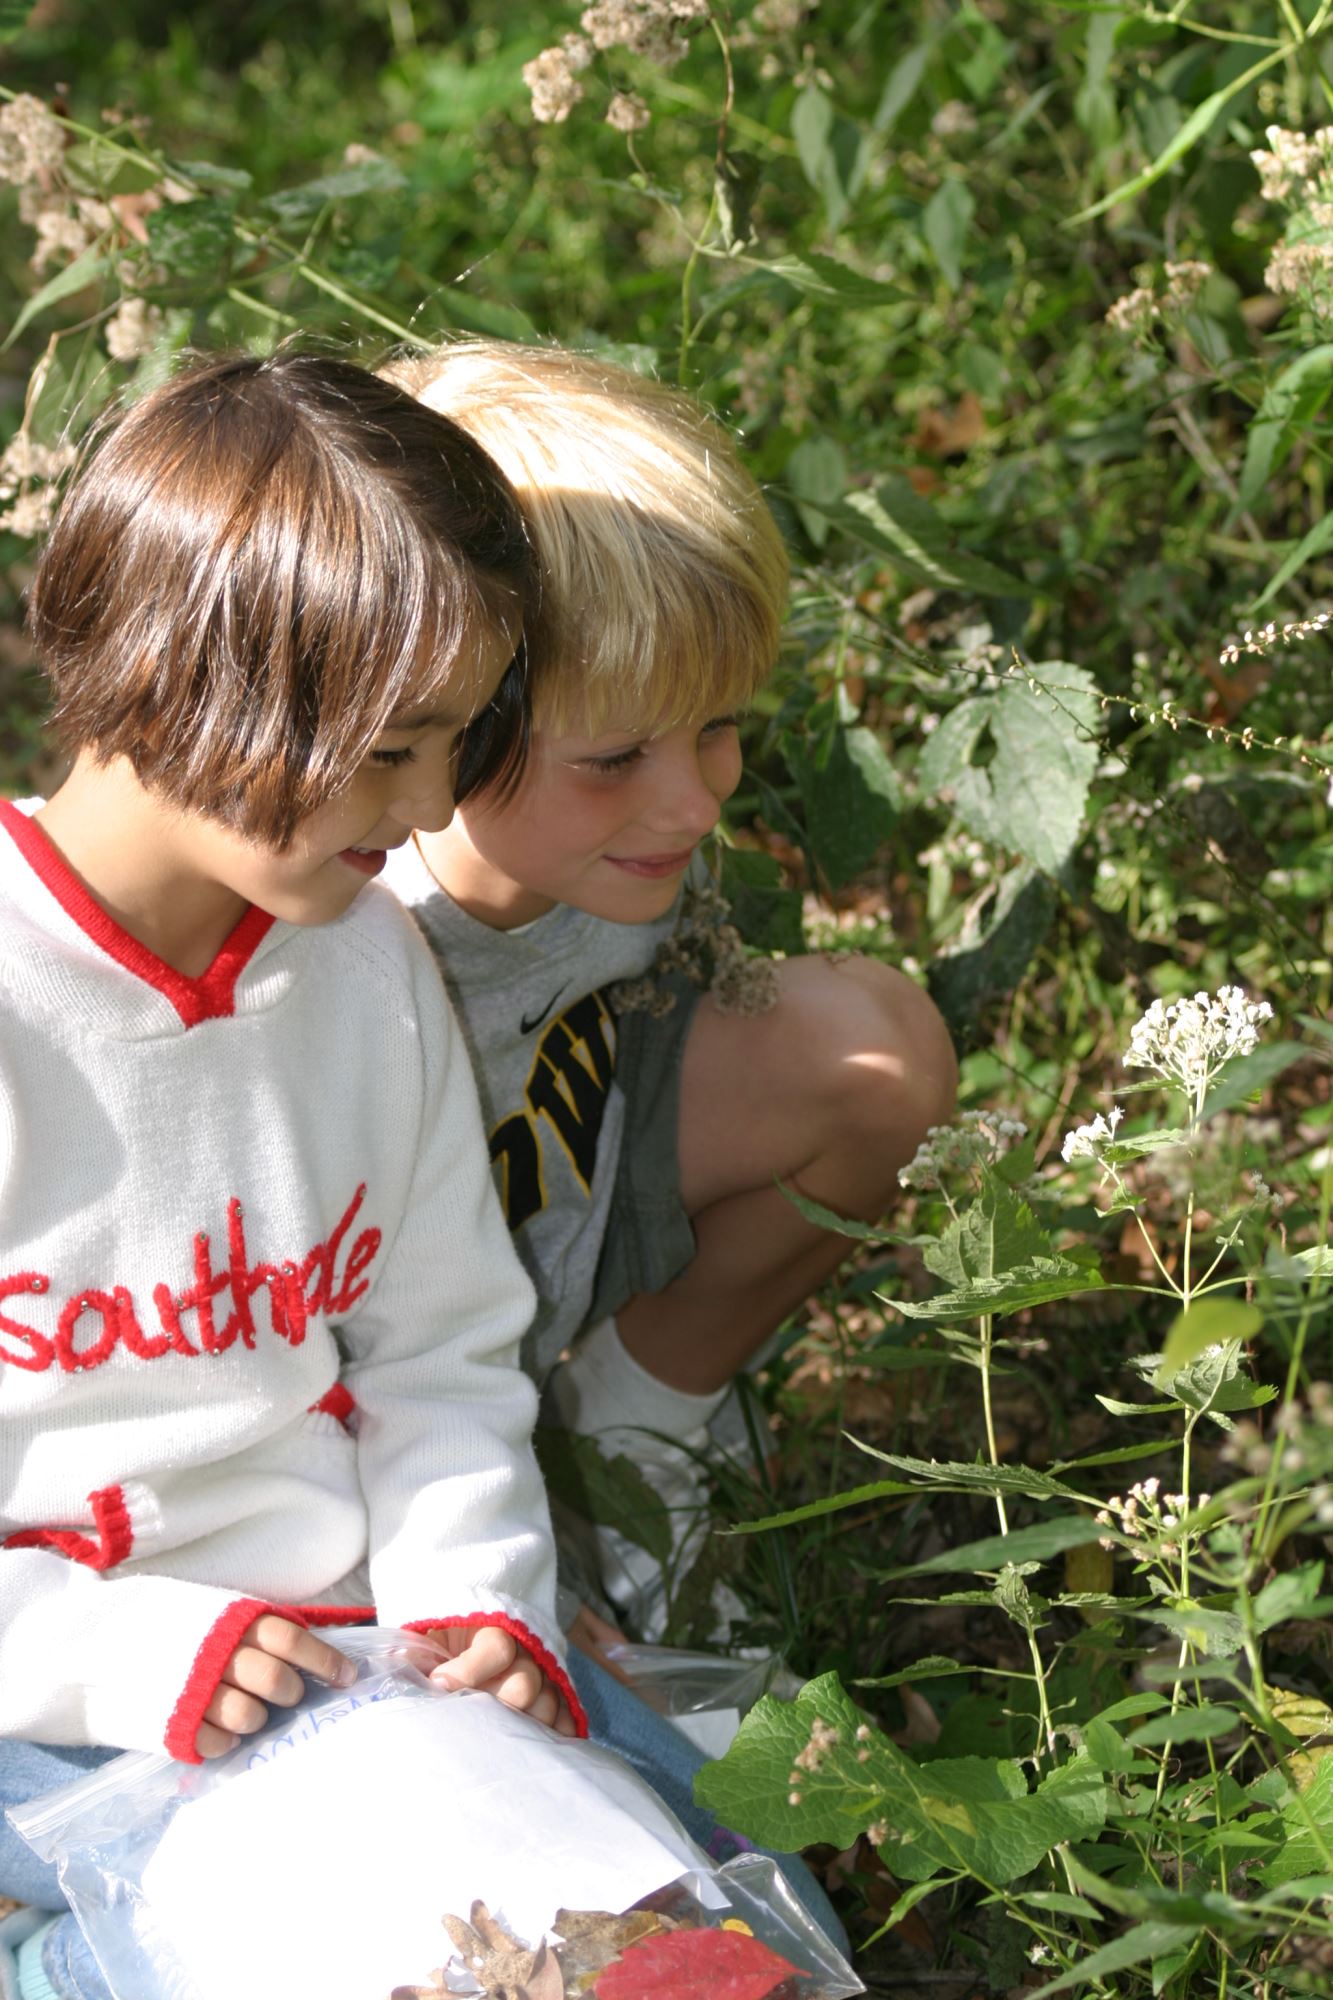 Two children examine a plant outdoors.